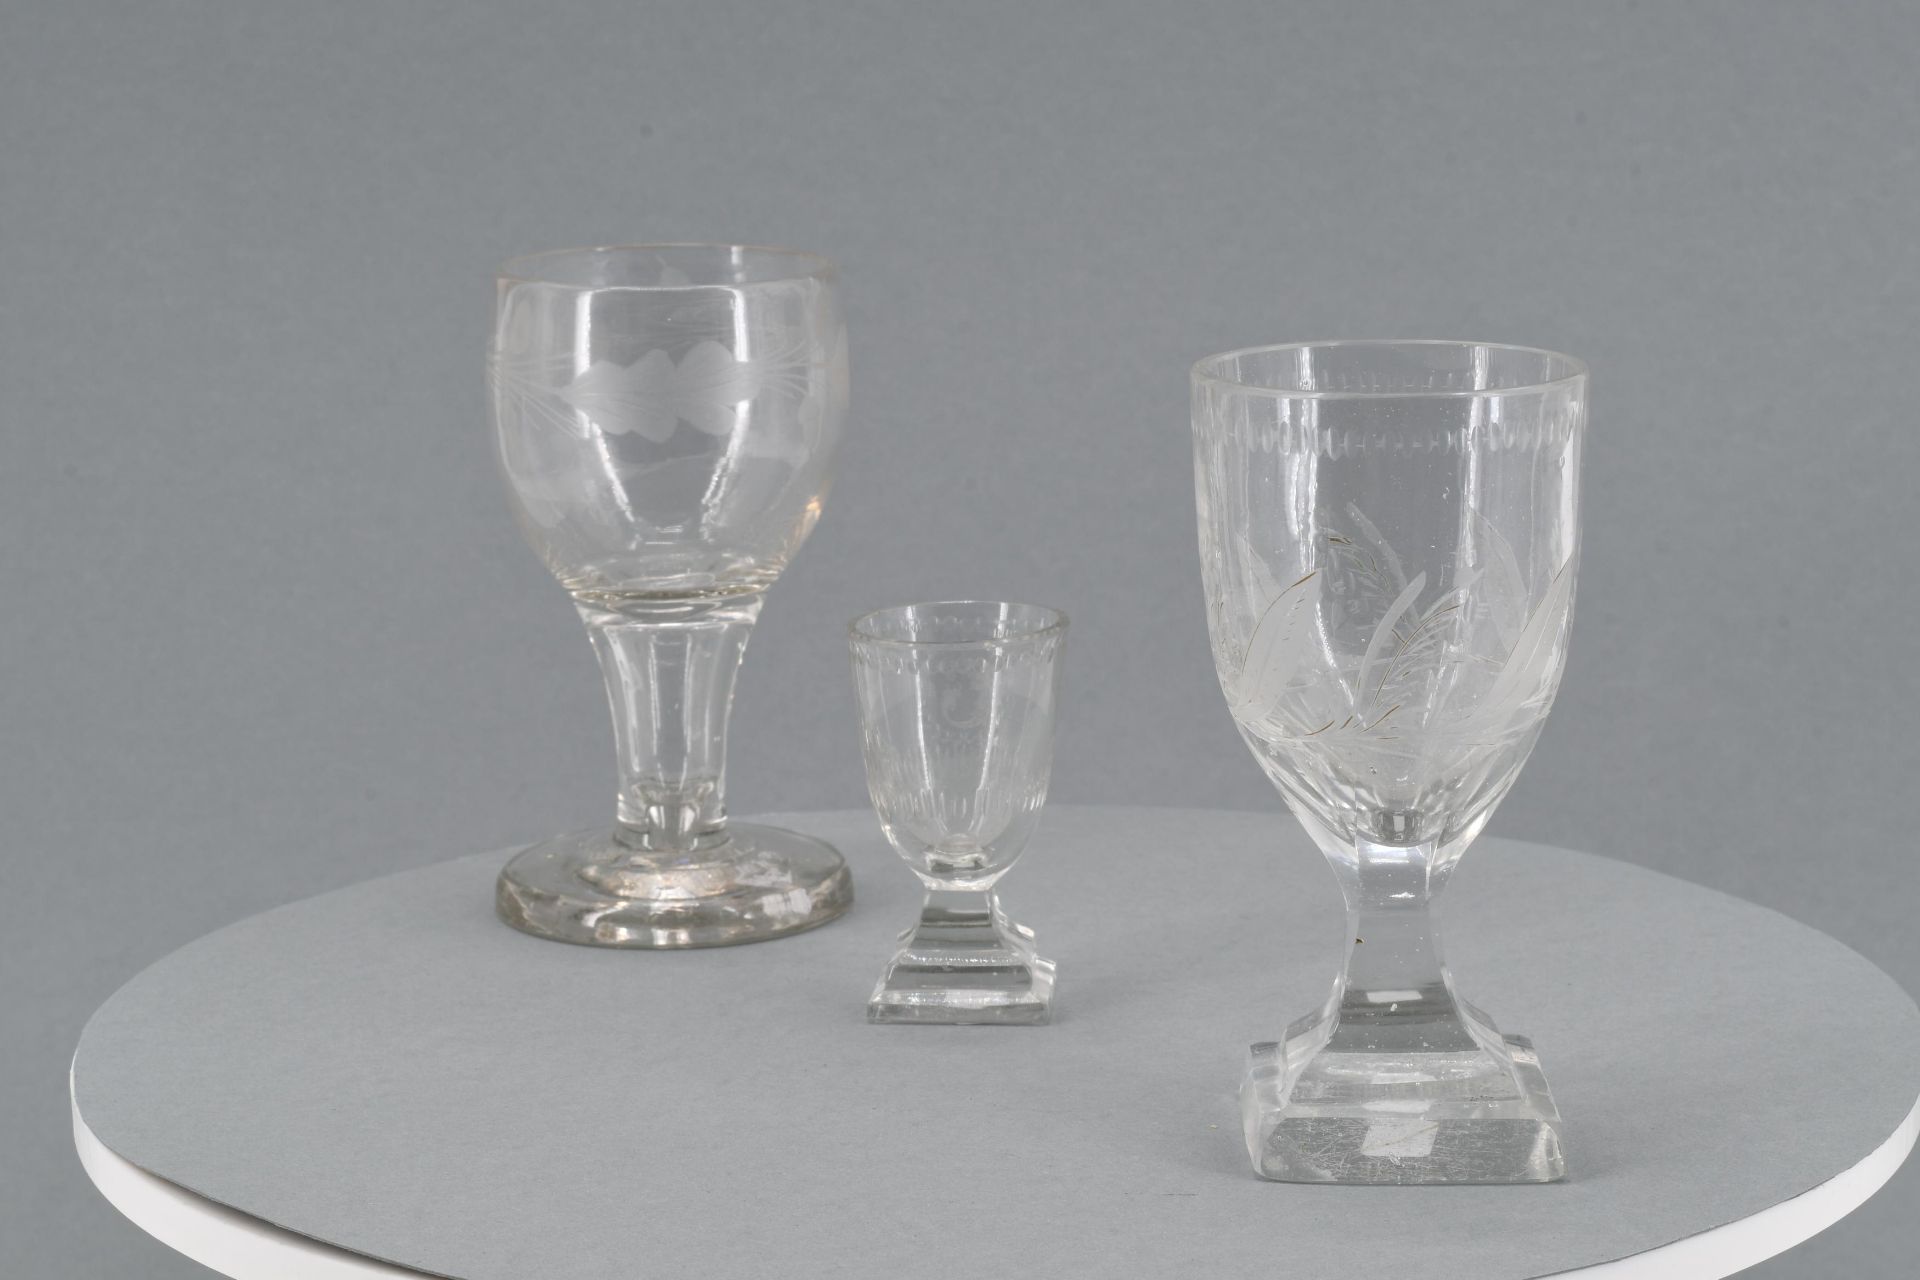 Goblet with monogram and schnapps glass with blue rim - Image 10 of 15